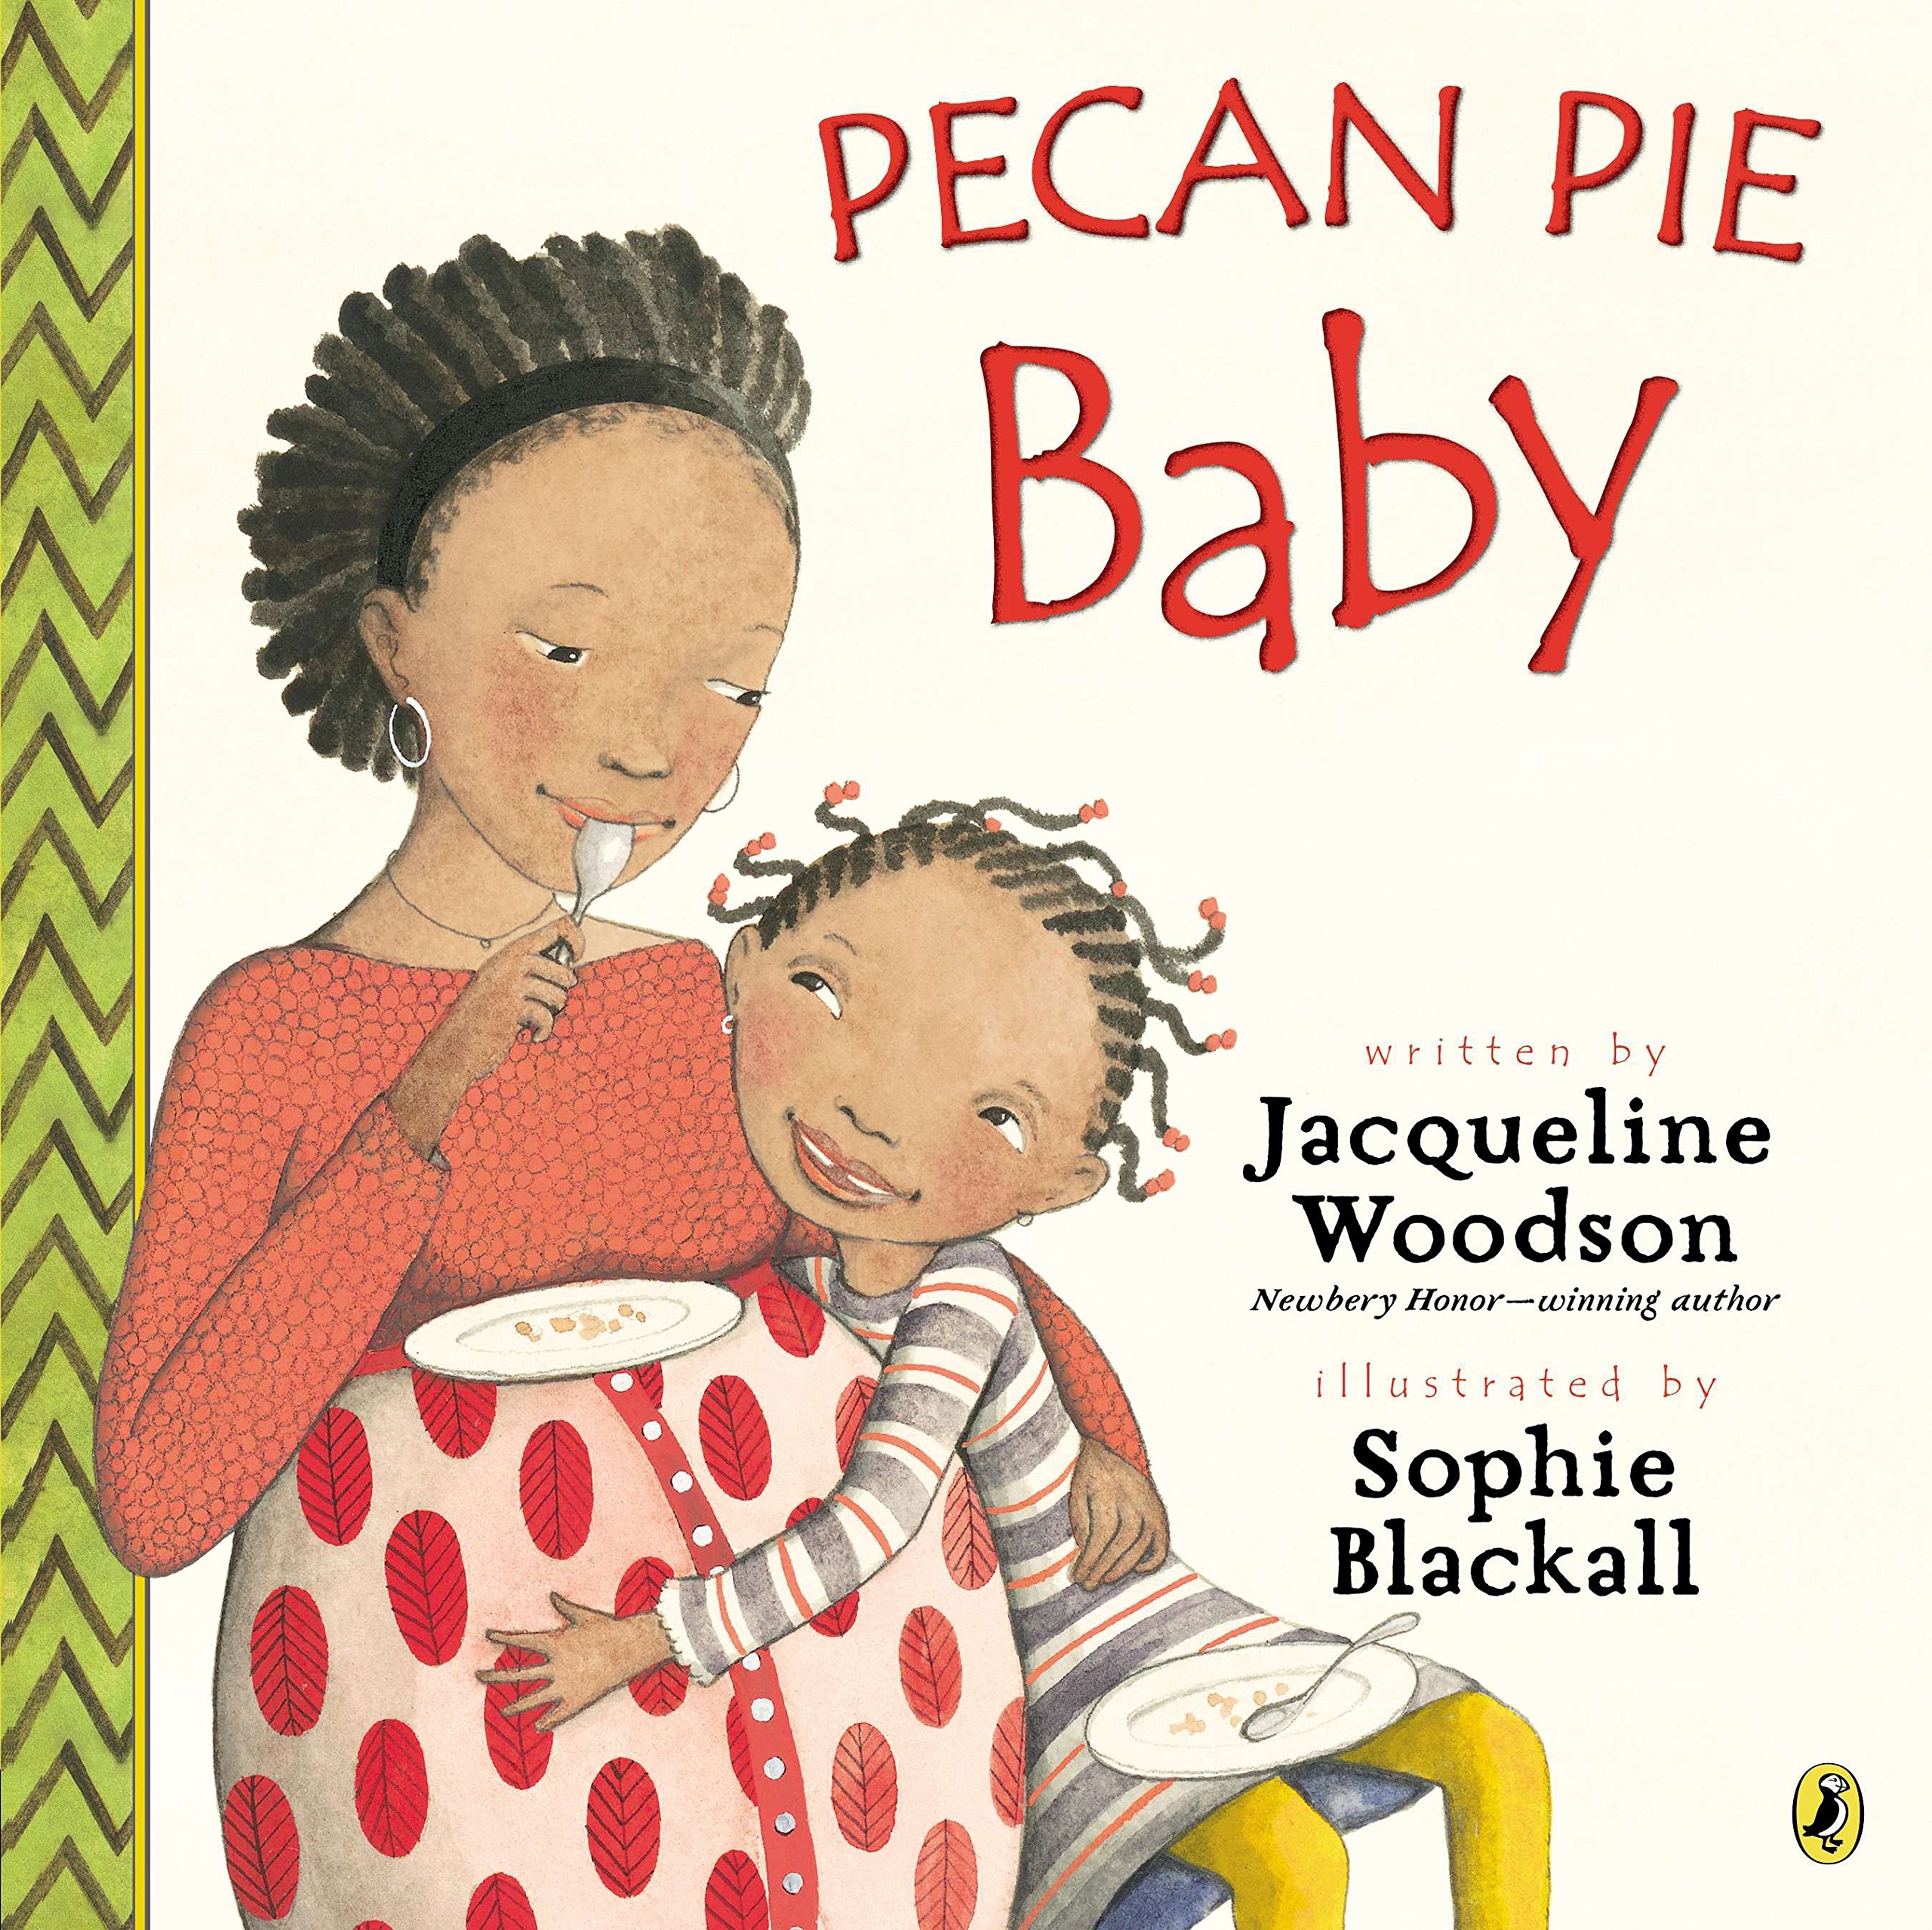 Pecan Pie Baby by Jacqueline Woodson book cover